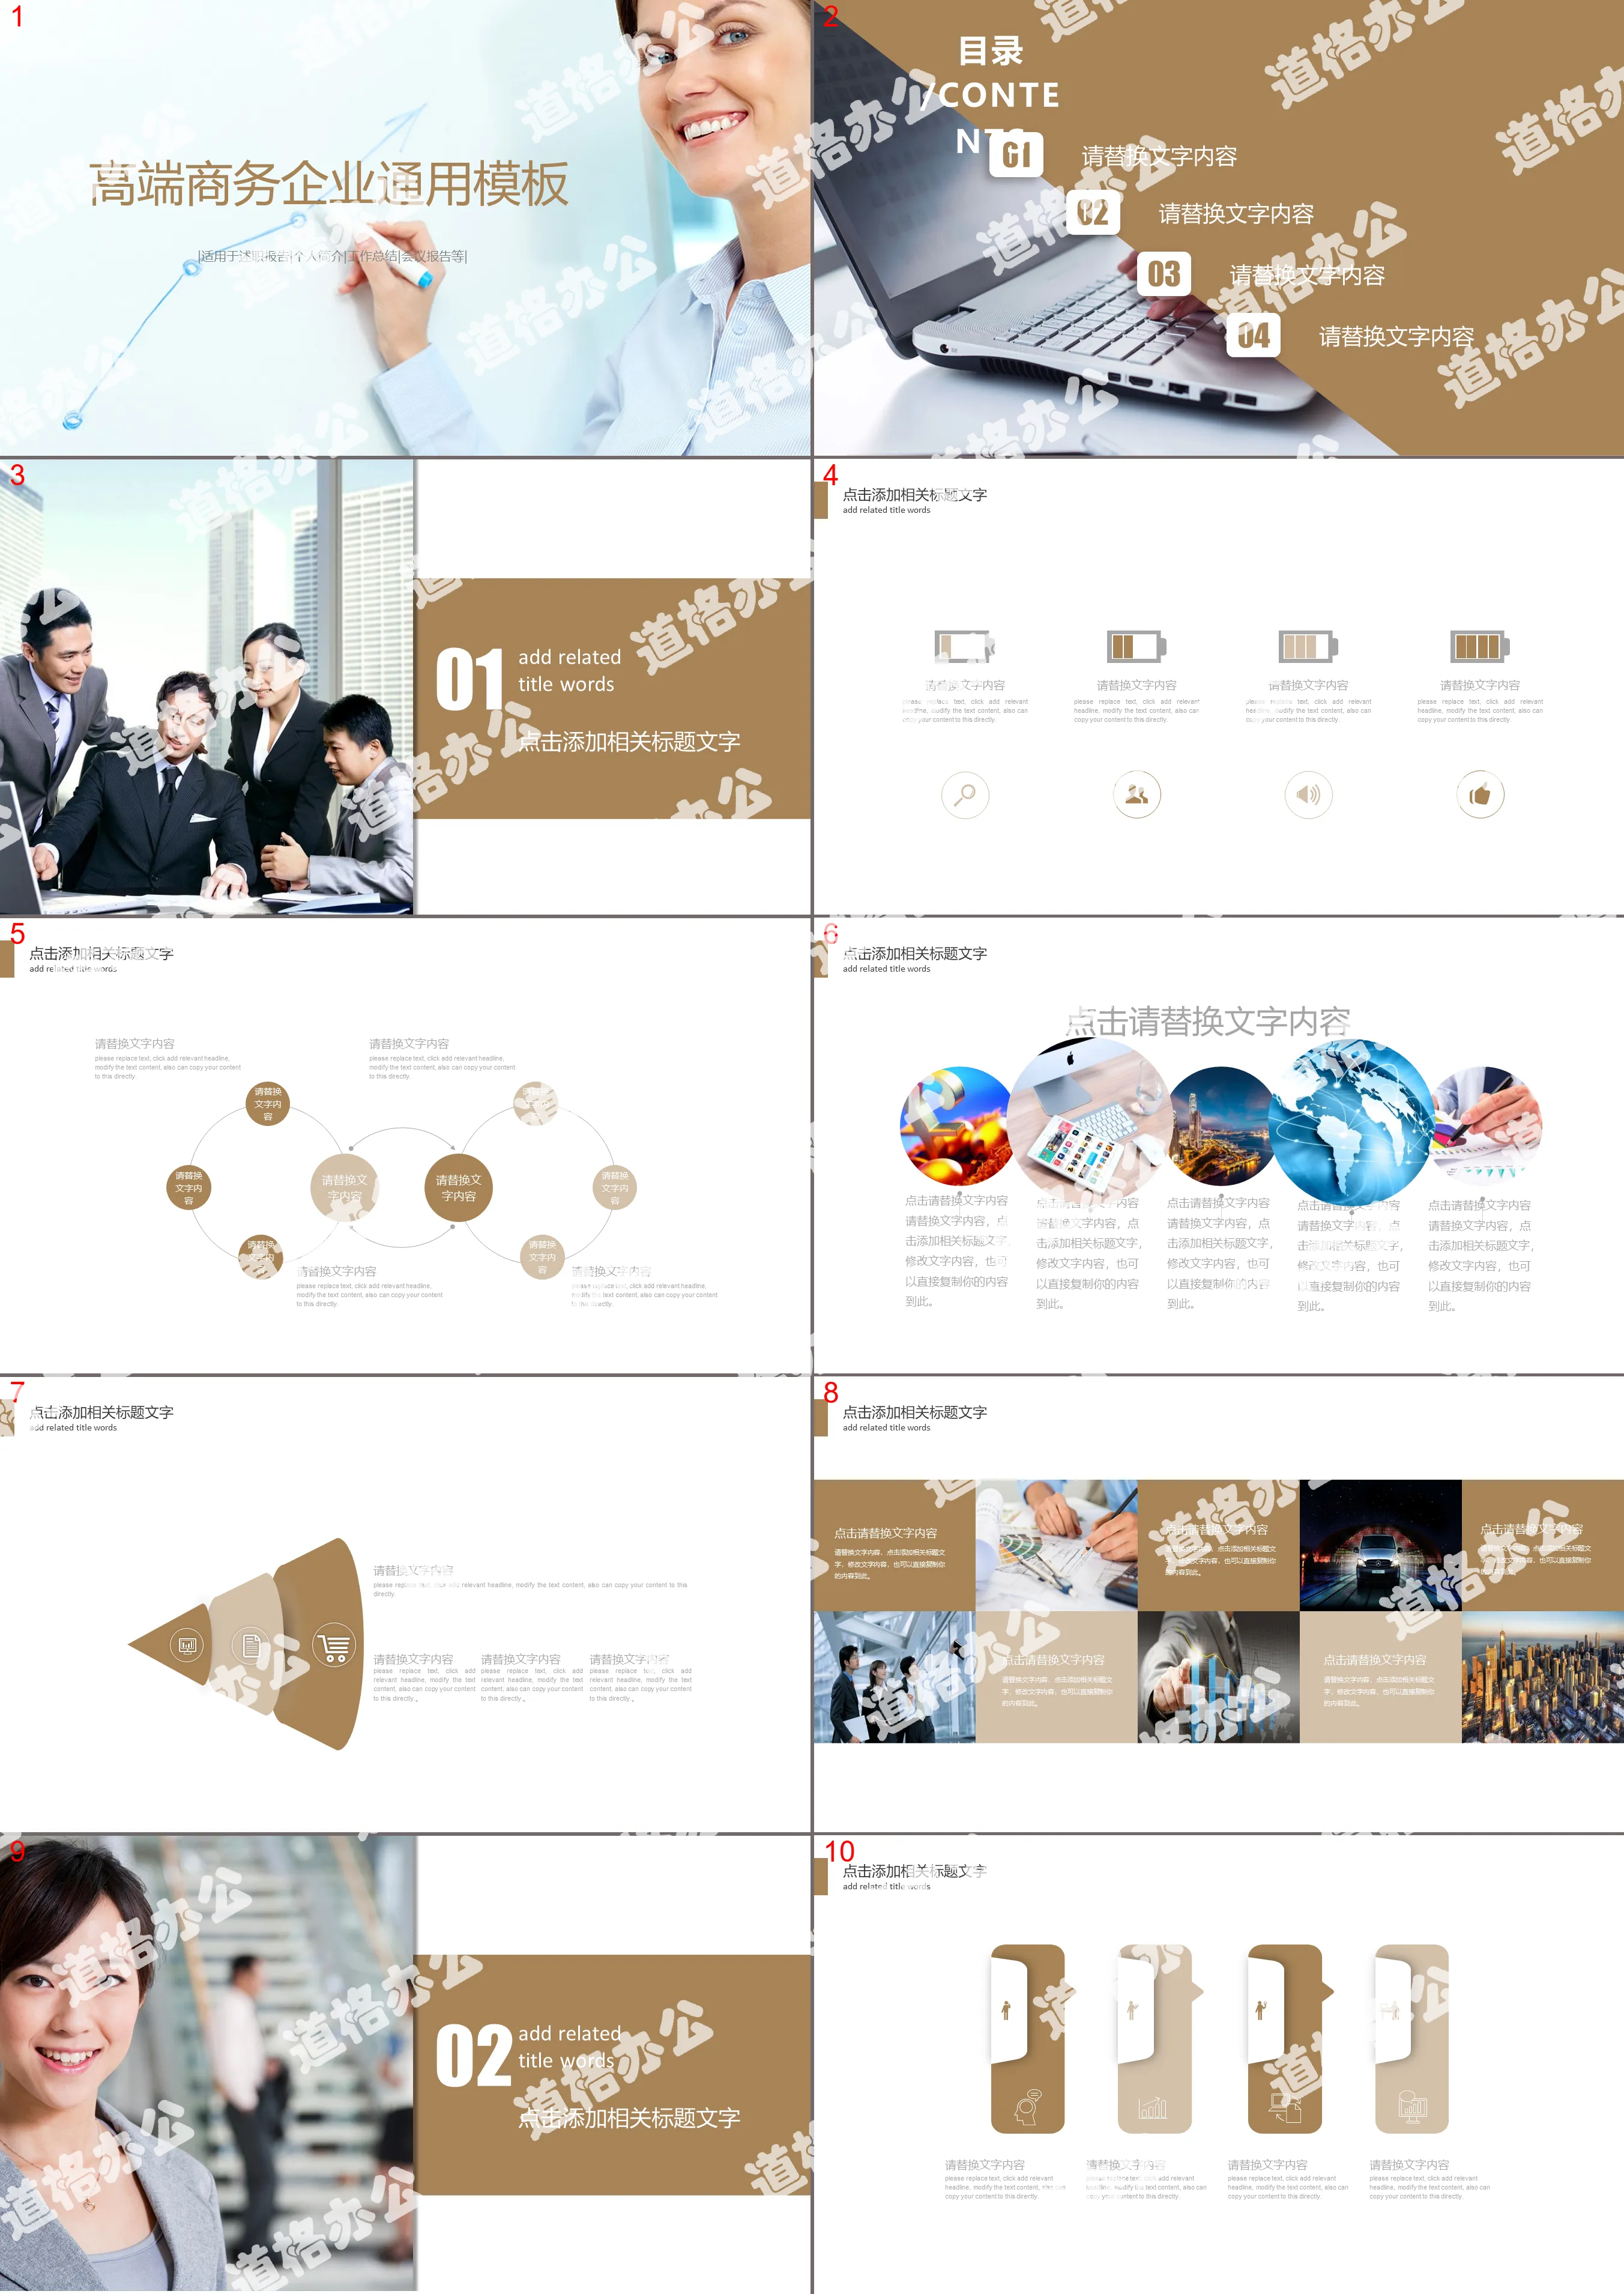 Work report PPT template with foreign business figures background